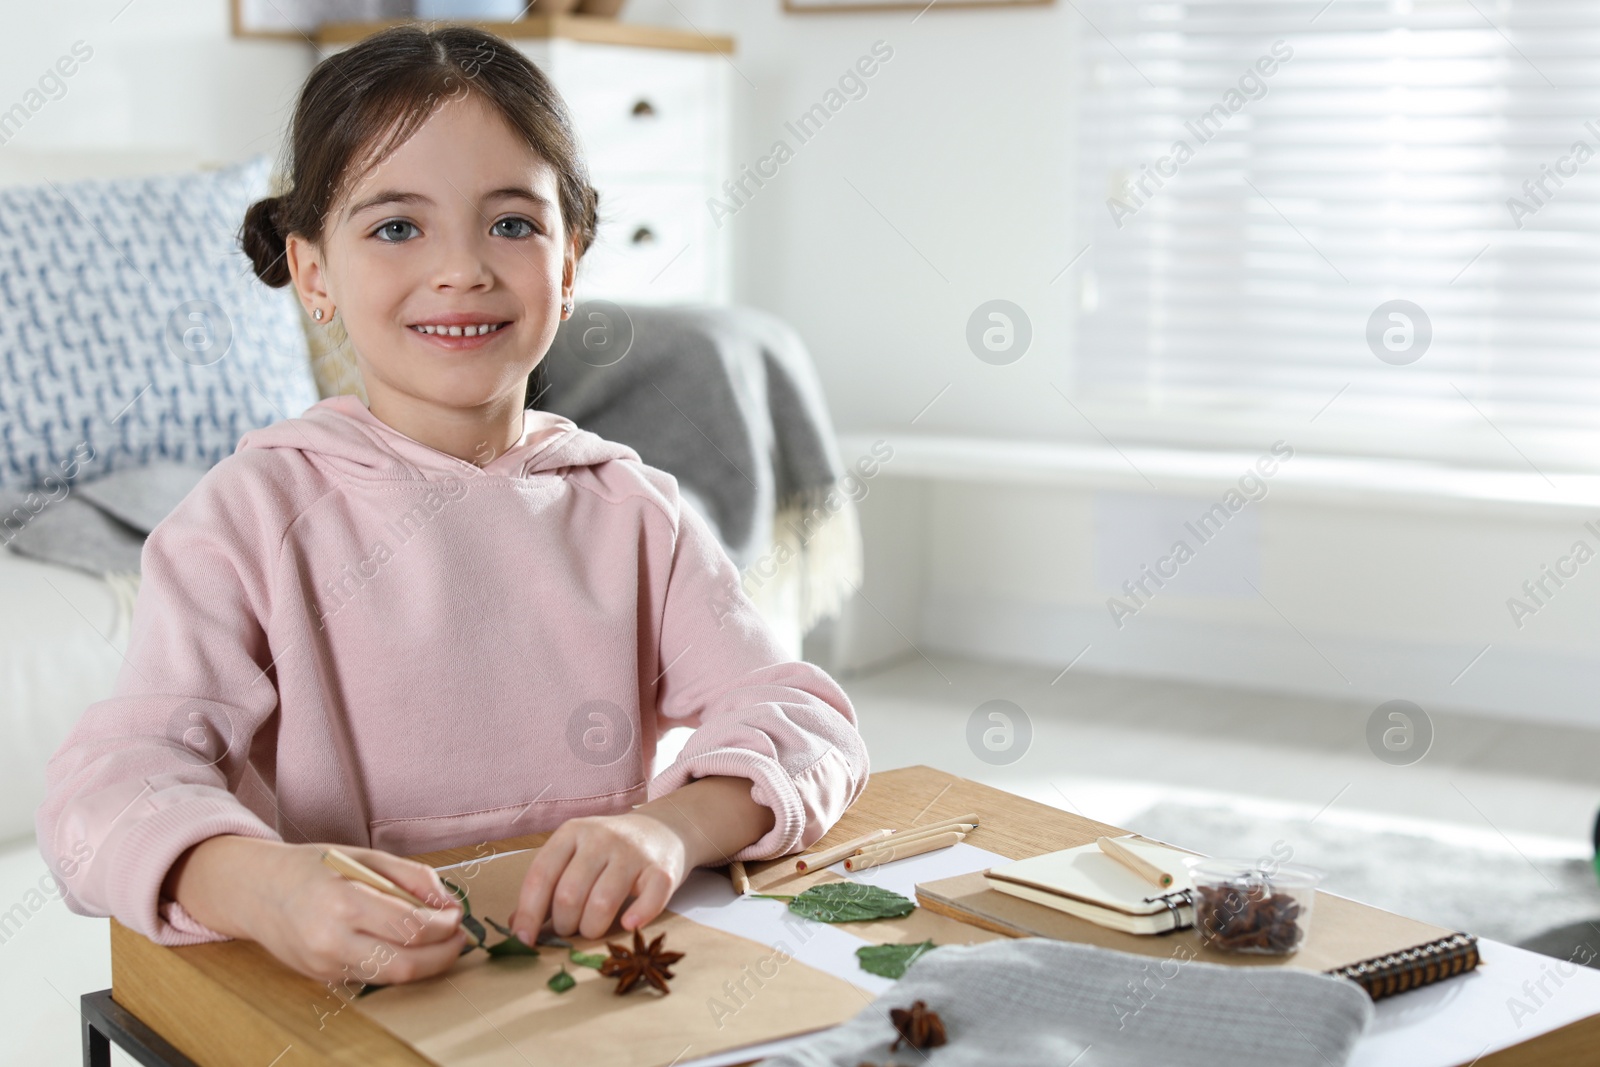 Photo of Little girl working with natural materials at table indoors, space for text. Creative hobby